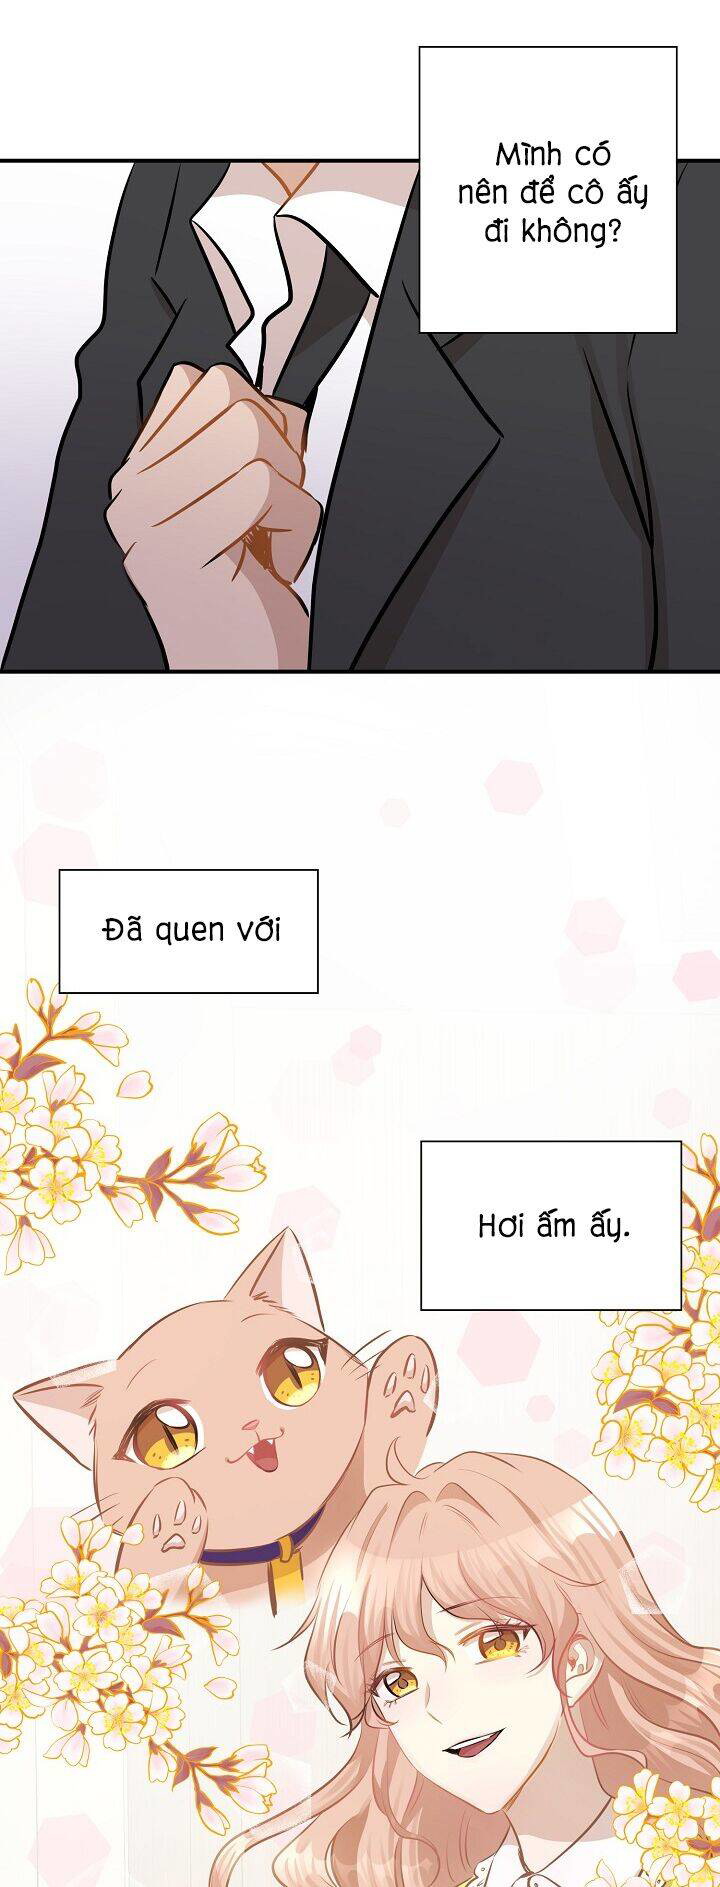 cuoc-song-ky-thu-chap-39-58